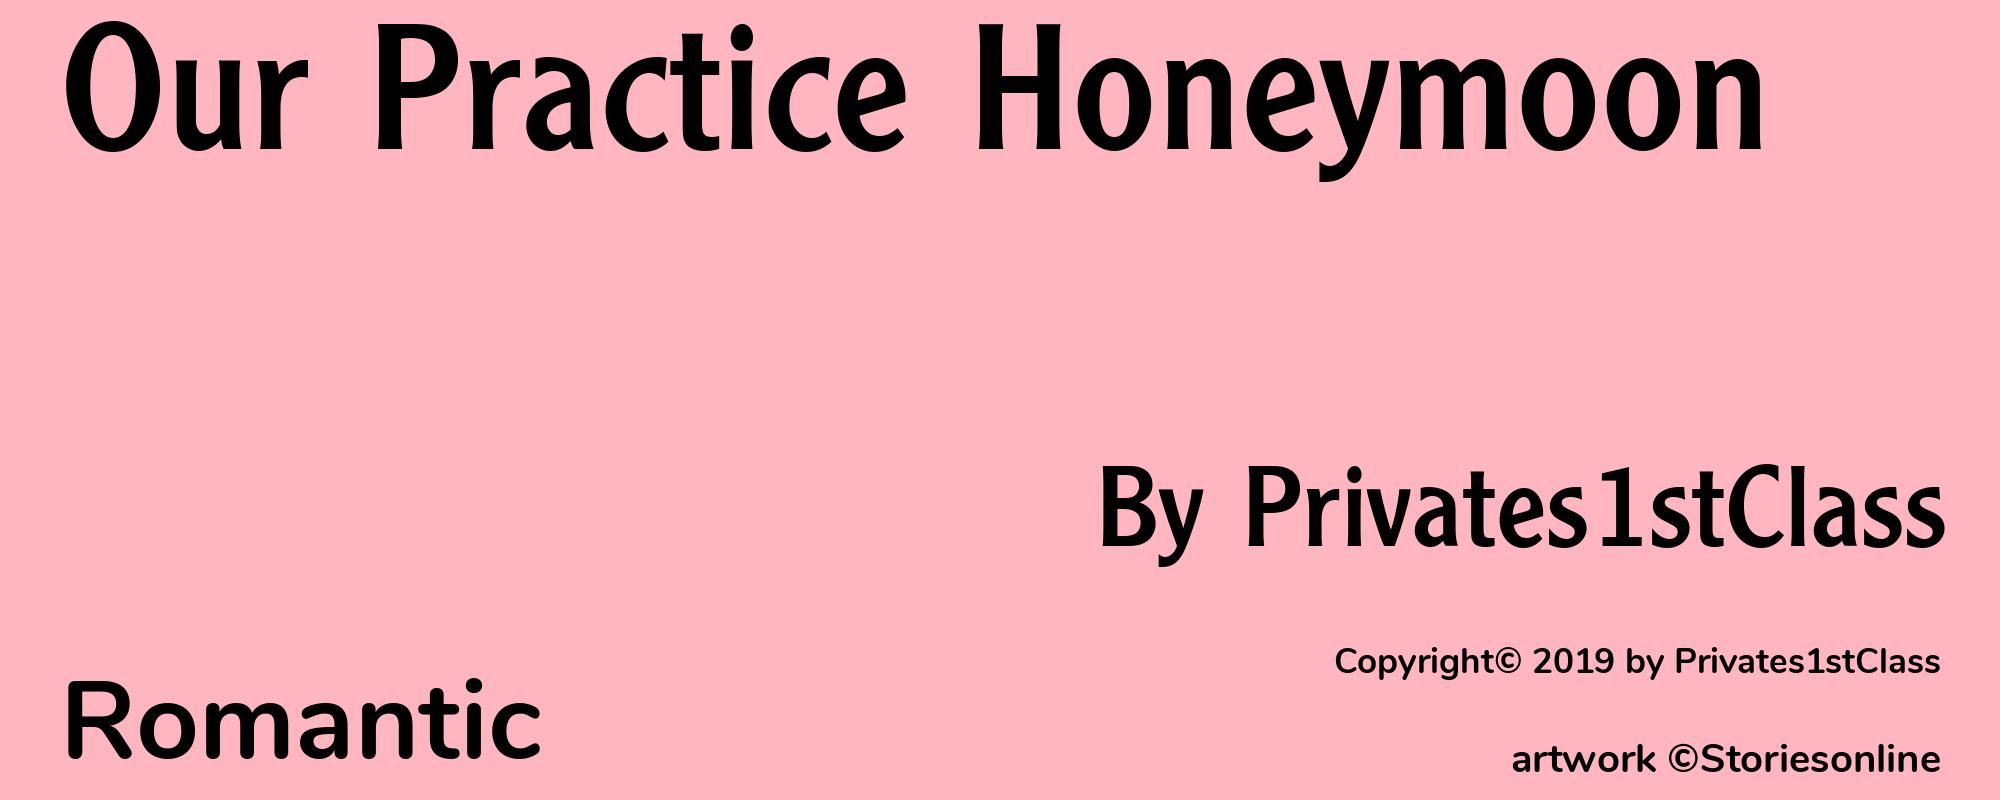 Our Practice Honeymoon - Cover